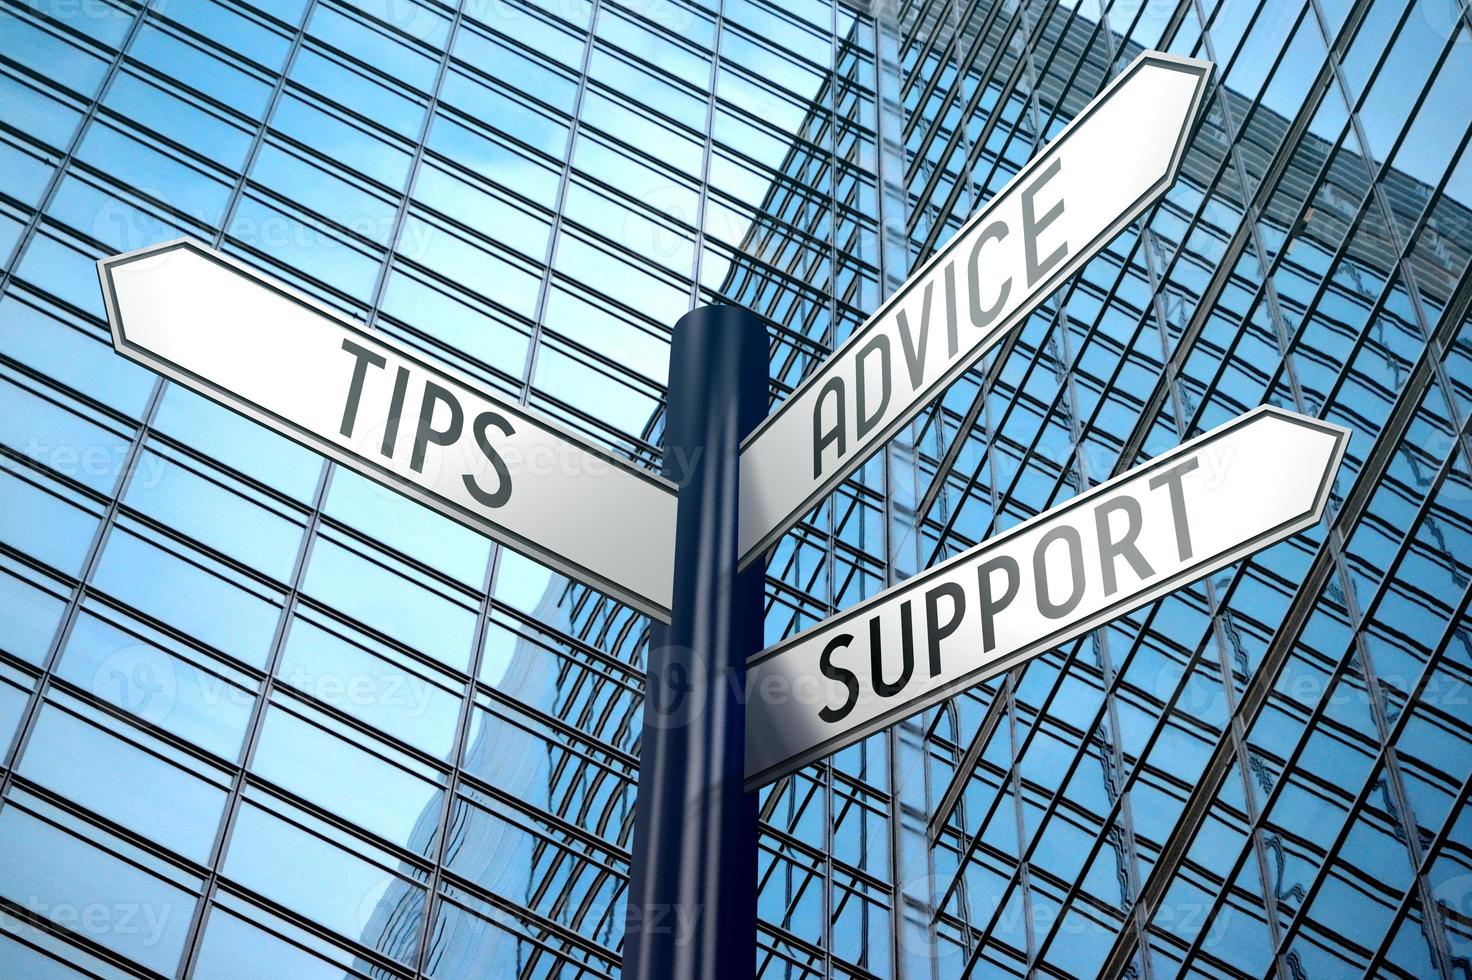 Tips, Advice, Support - Signpost With Three Arrows, Office Building in Background photo